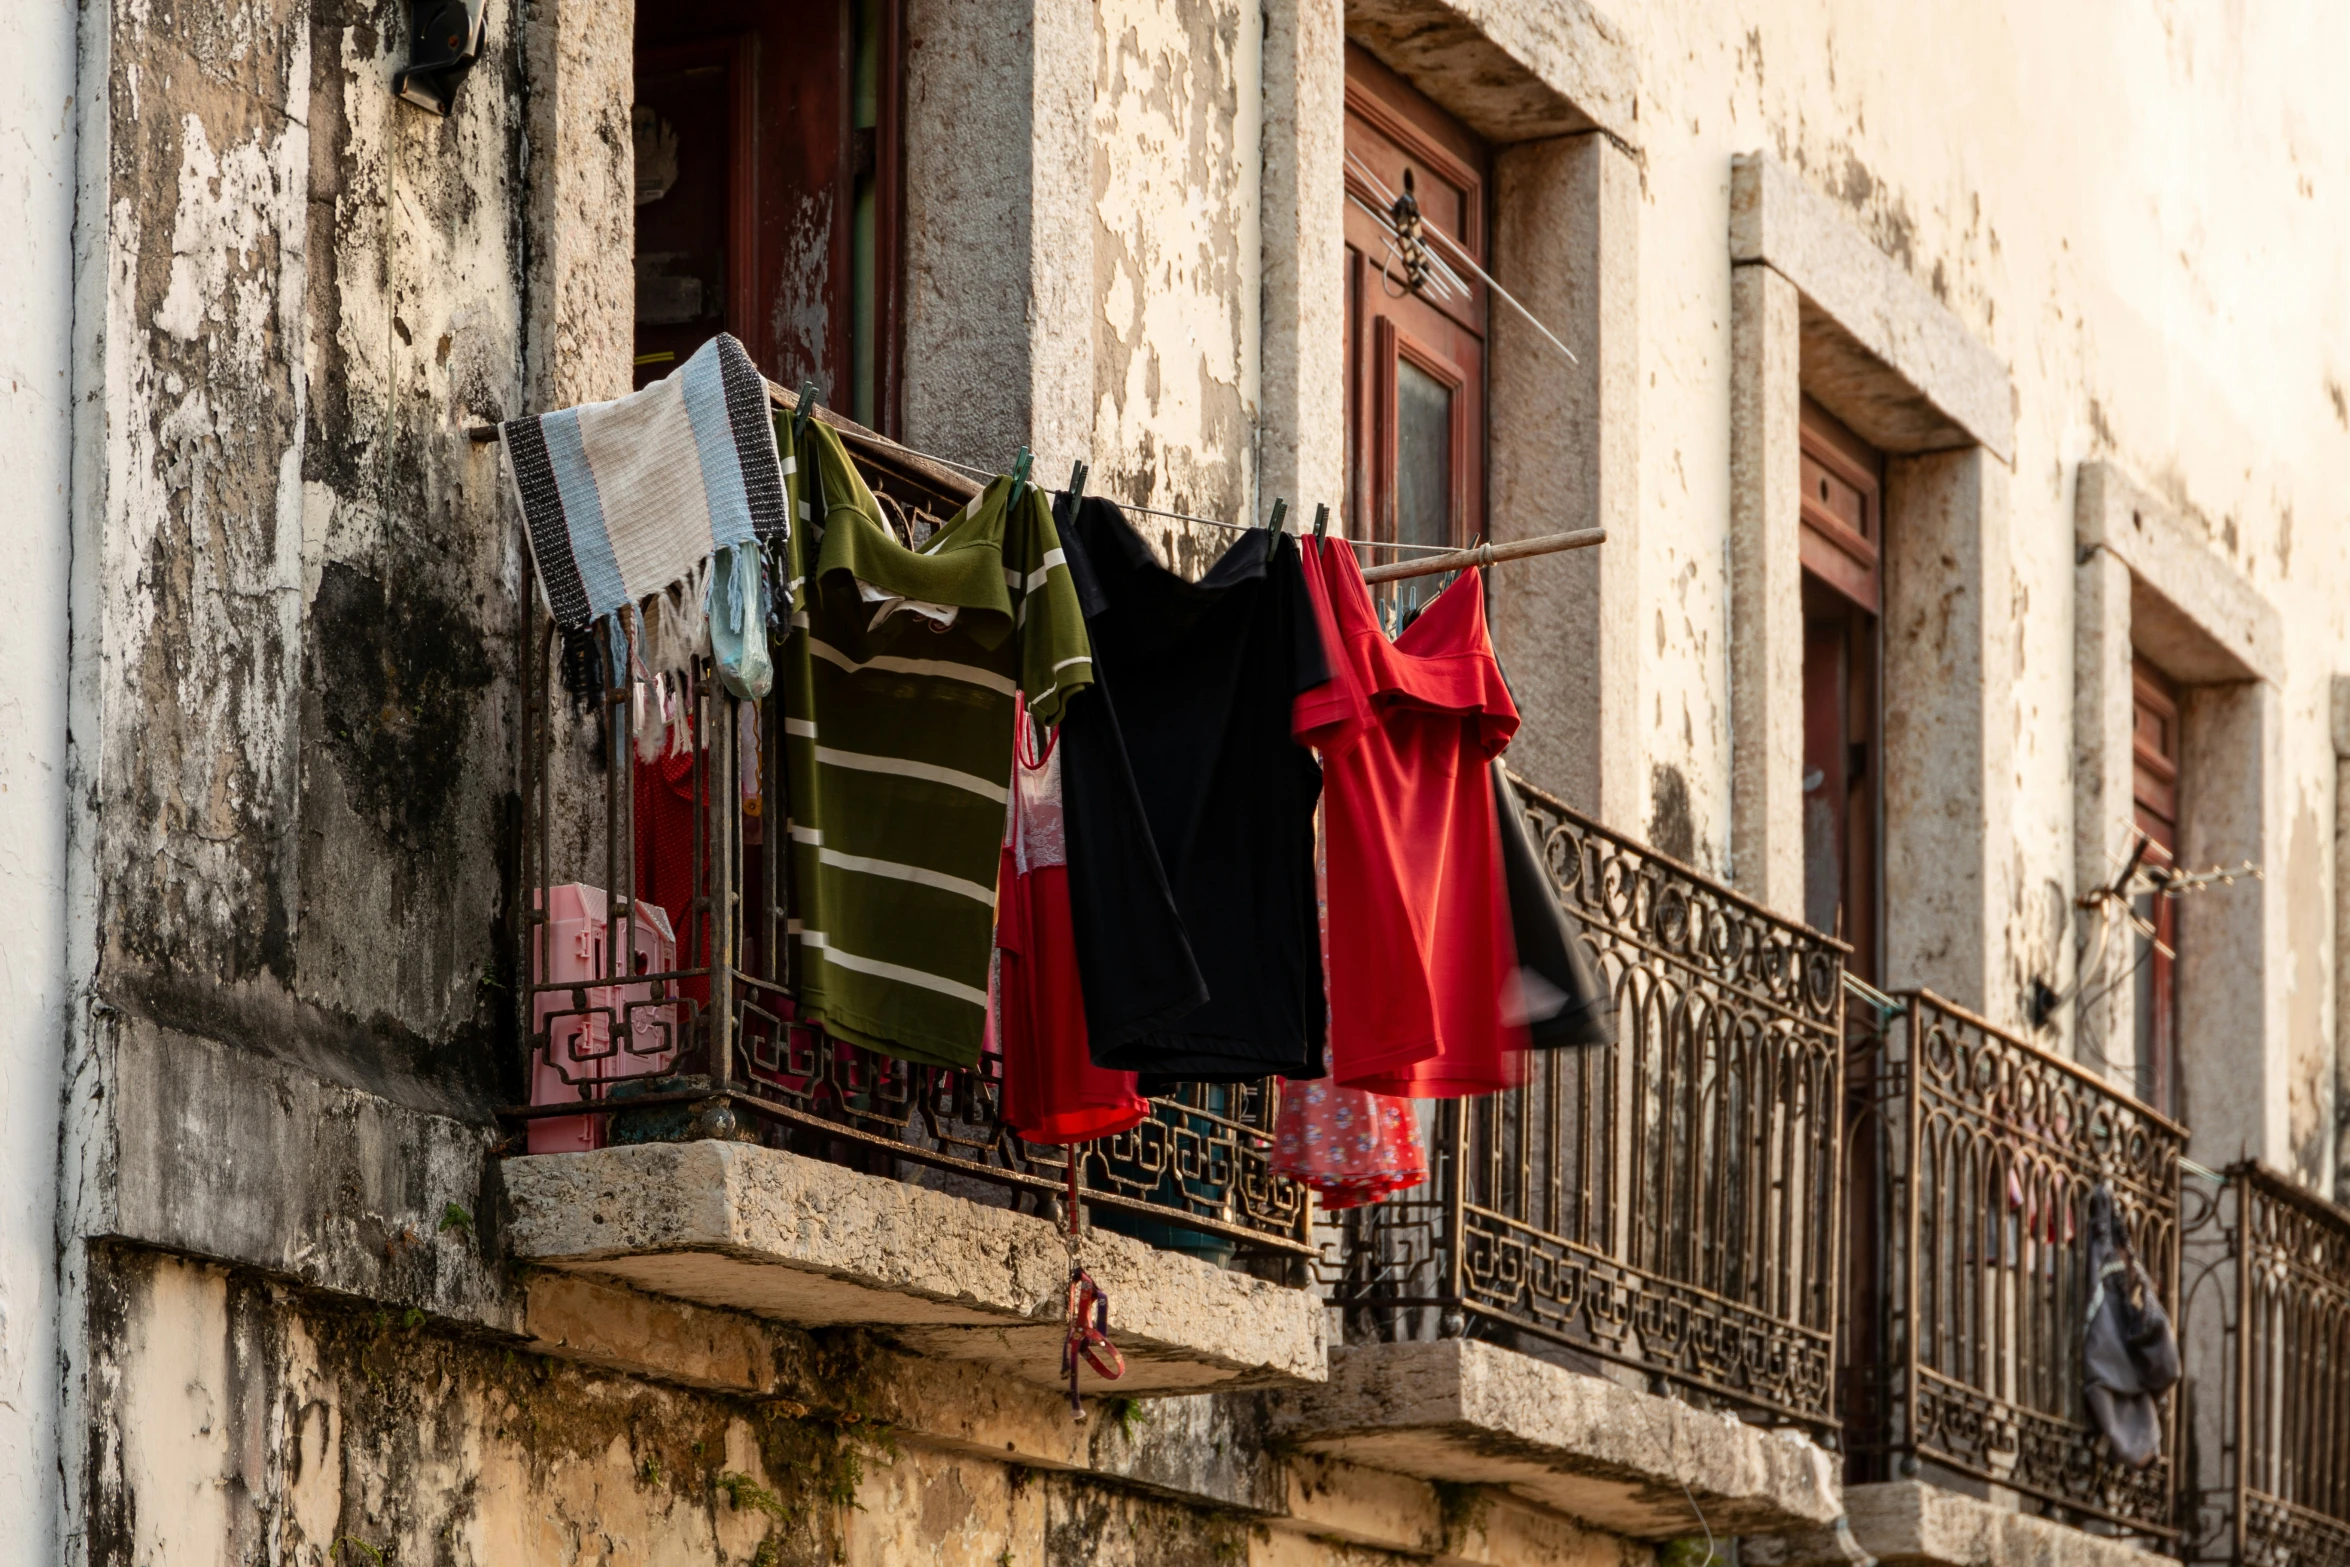 several clothes hung to dry on the balcony and in front of the windows